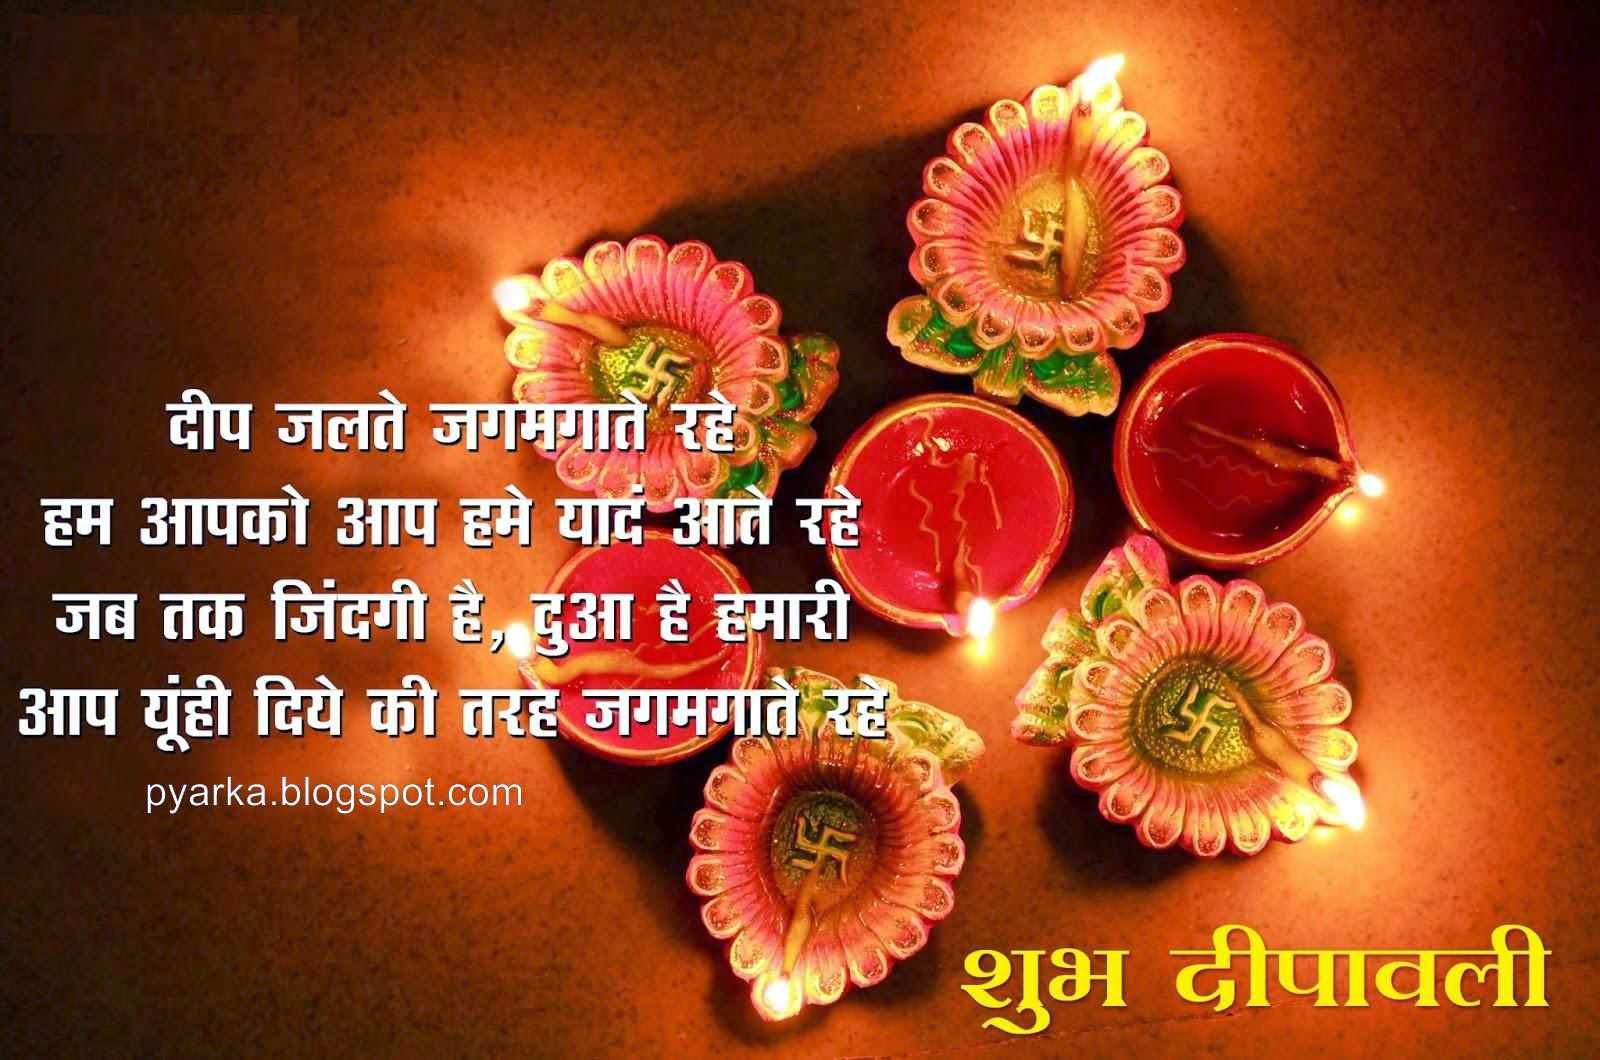 Happy Diwali Hindi Sms Message Wishes Quotes Shubh - Diwali Wishes Images  Download - 1600x1060 Wallpaper 